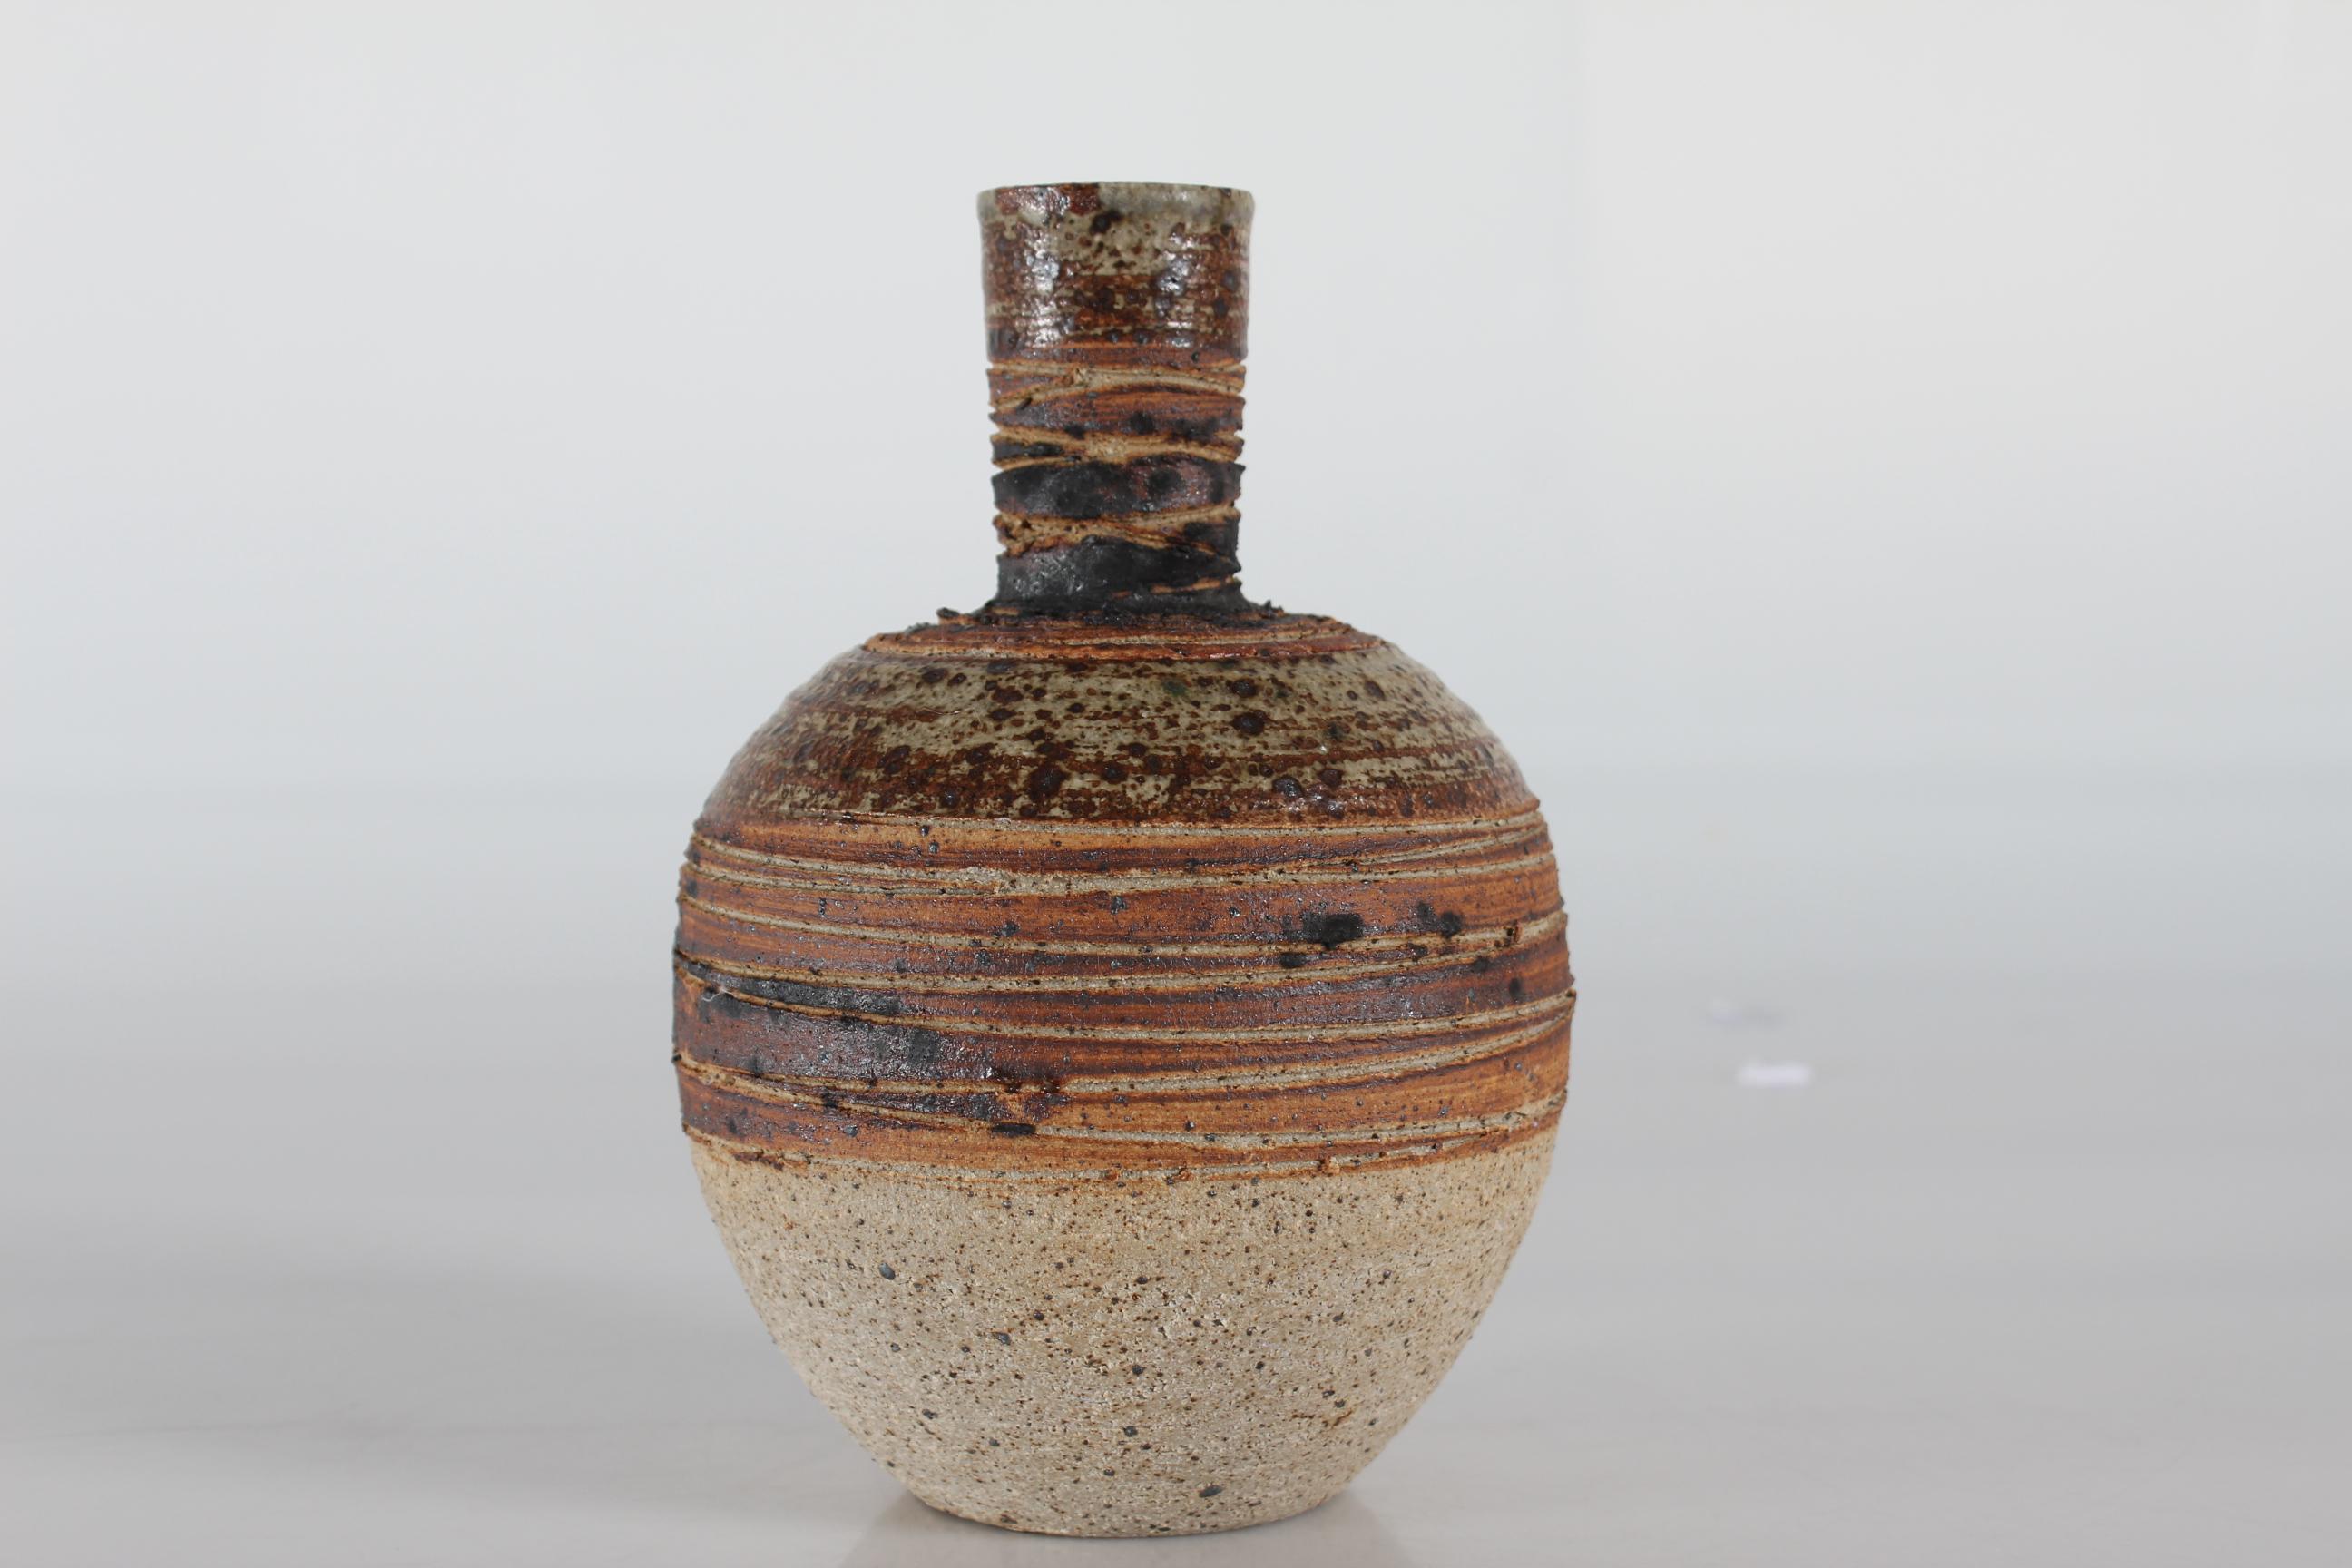 Ceramic vase by Danish ceramist Tue Poulsen (born 1939) from his own studio. Made ca 1970s. 
It is made with chamotte clay and has a rustic expression with incised stripes in earthen colors.

The vase is stamped on bottom: Tue Denmark

Very good